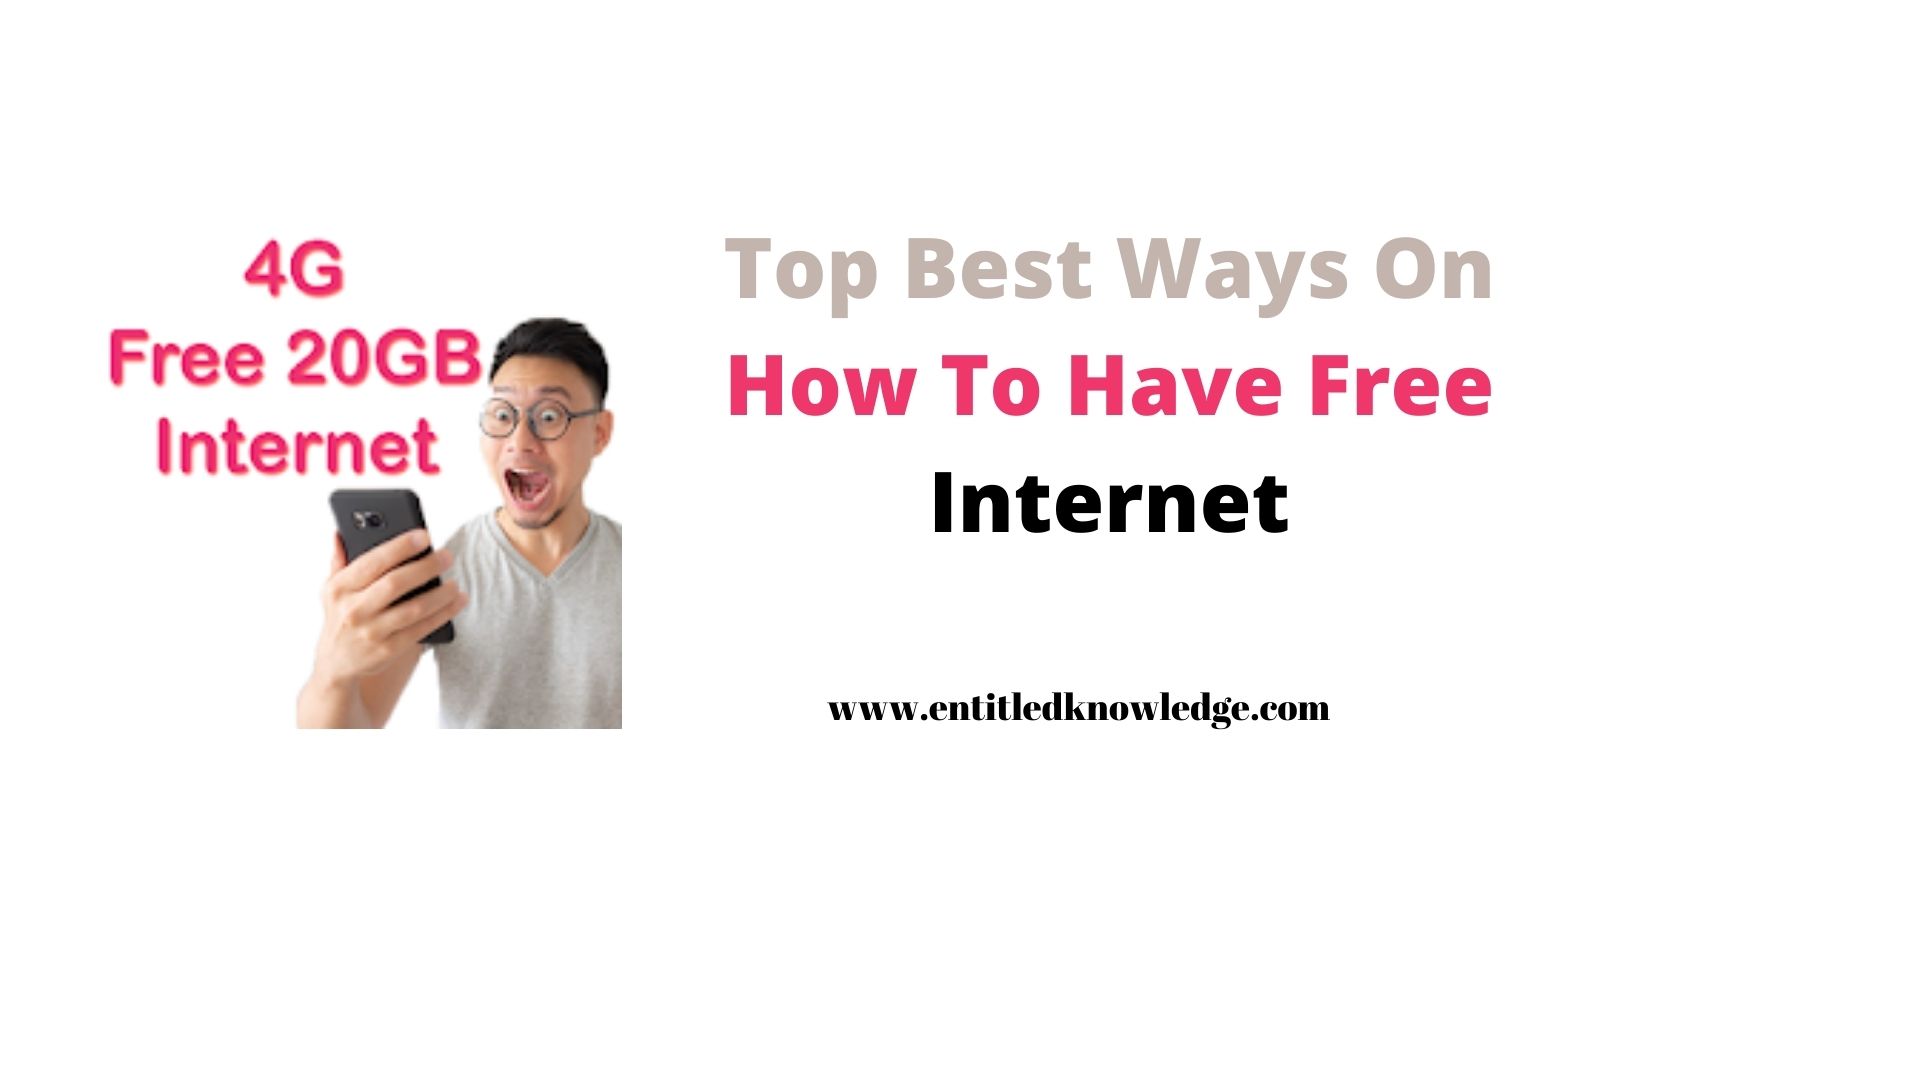 Top Best Ways On How To Have Free Internet (Legally and Illegally)